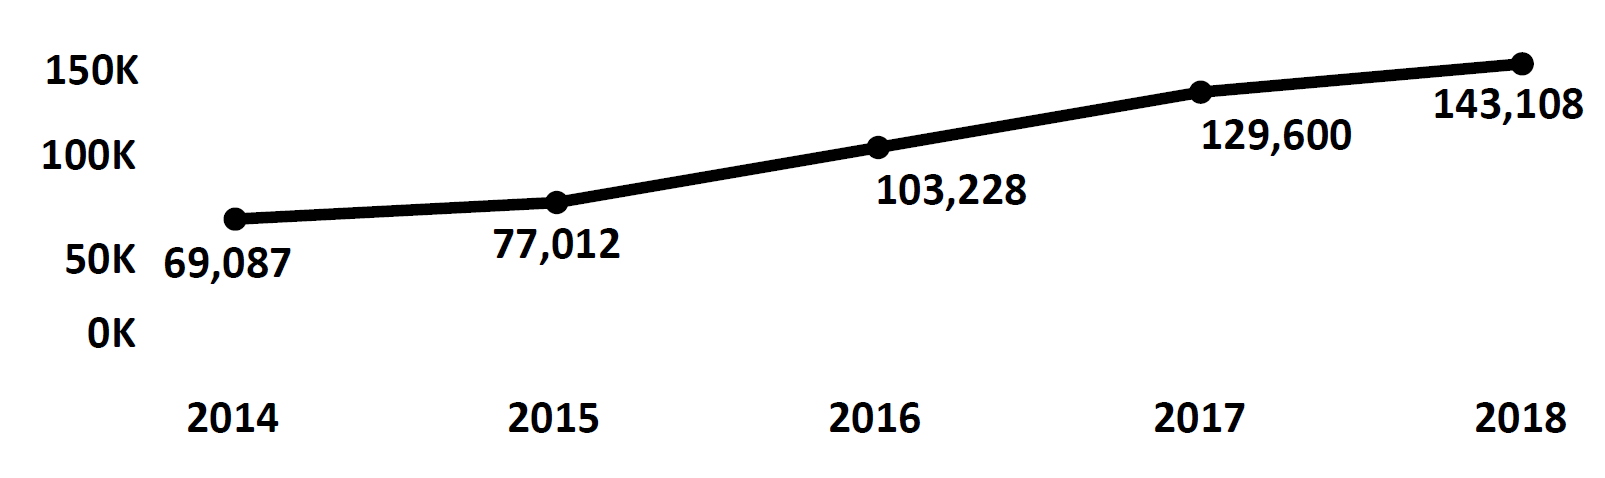 Graph of Do Not Call complaints recorded in Colorado from fiscal year 2014 to fiscal year 2018. In 2014 there were 69,087 complaints filed, which increased steadily each year, peaking in 2018 with 143,108 complaints filed.